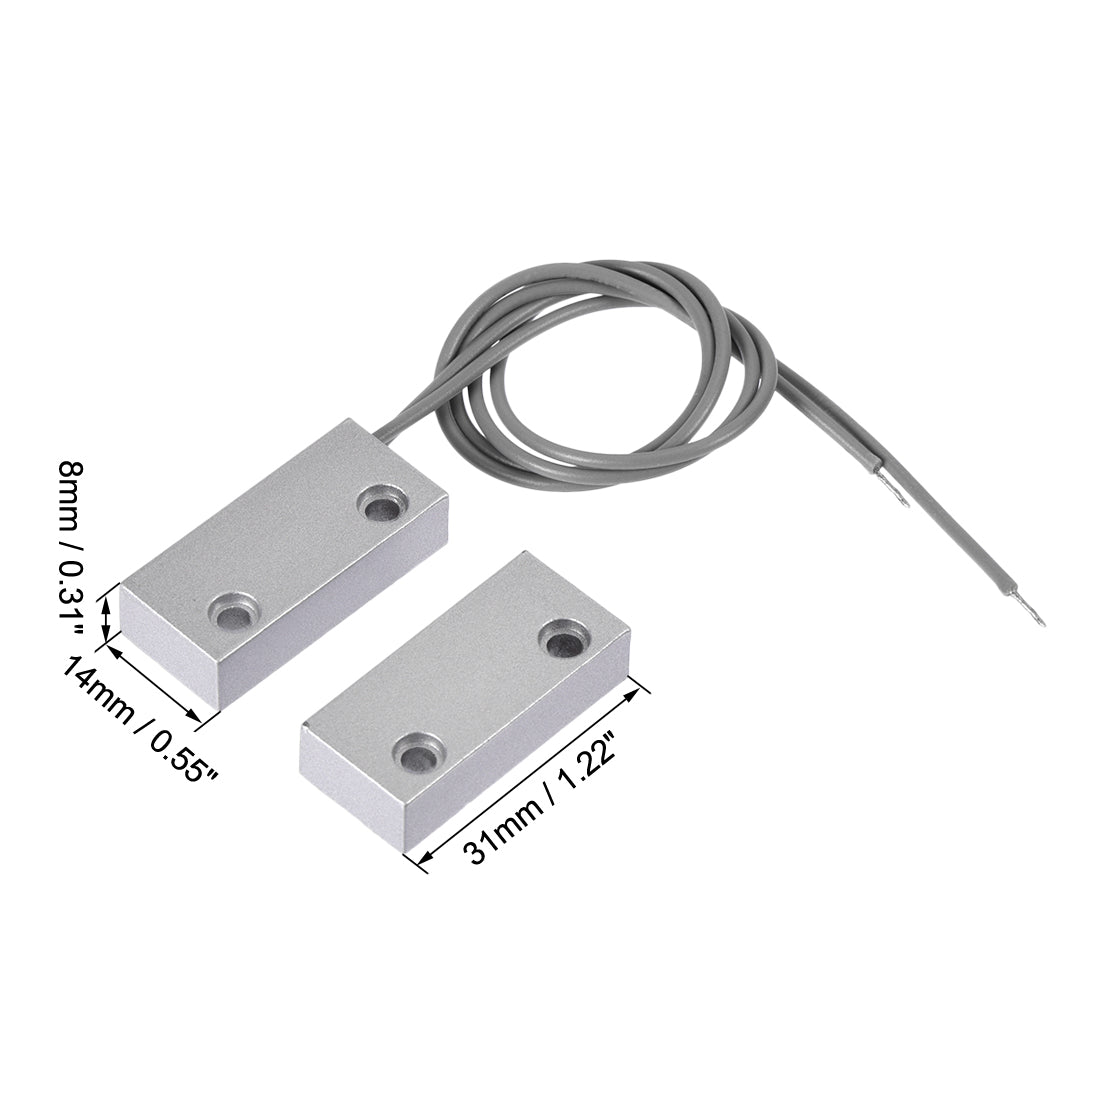 uxcell Uxcell MC-51 NO Rolling Gate Door Contact Magnetic Reed Switch 2Set